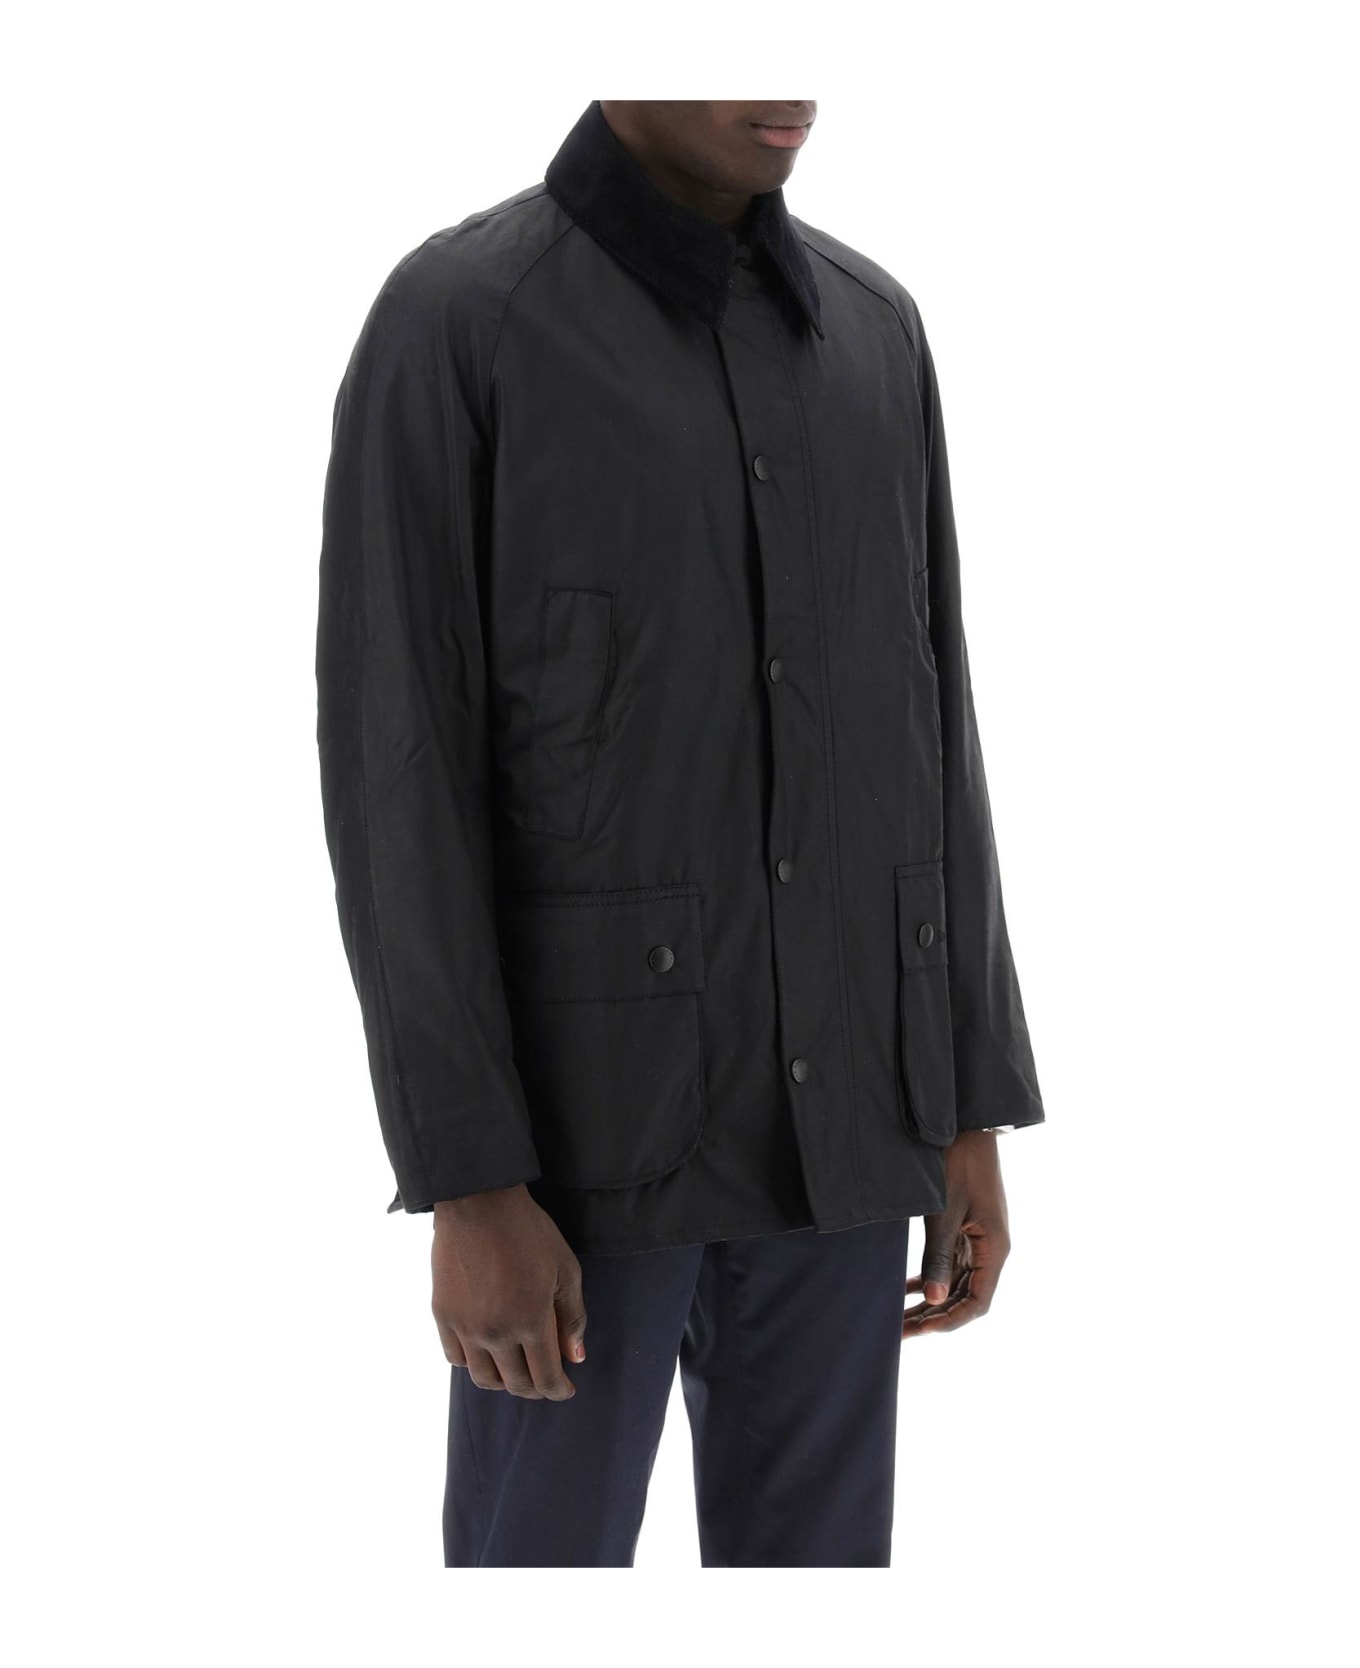 Barbour Ashby Waxed Jacket - BLACK (Black)